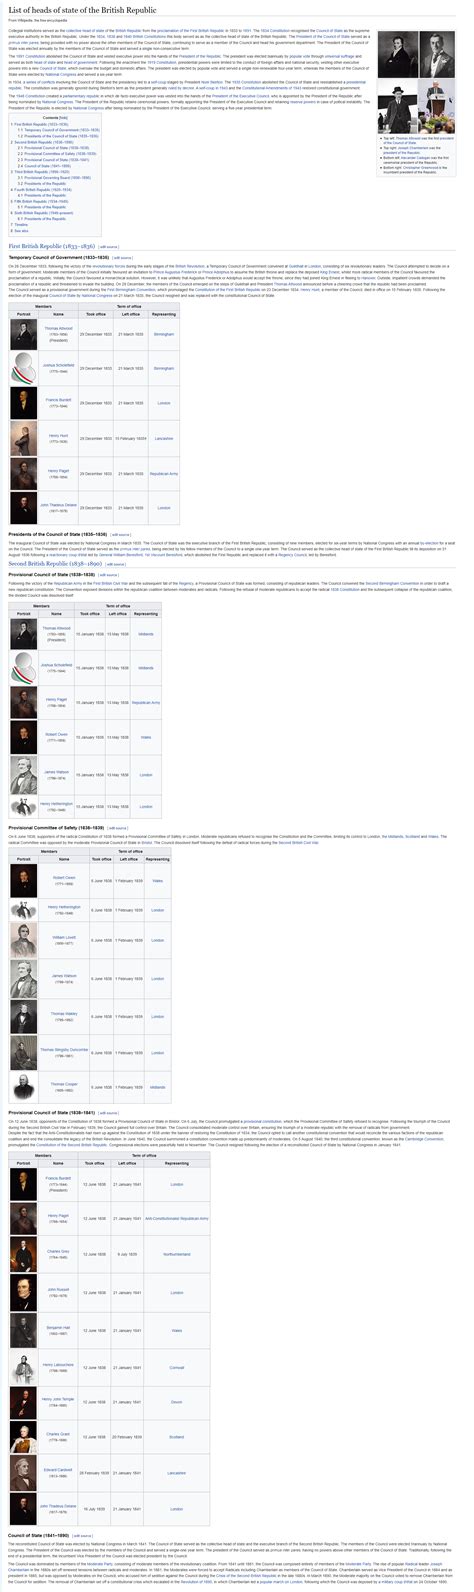 Alternate Wikipedia Infoboxes Vi Do Not Post Current Politics Or